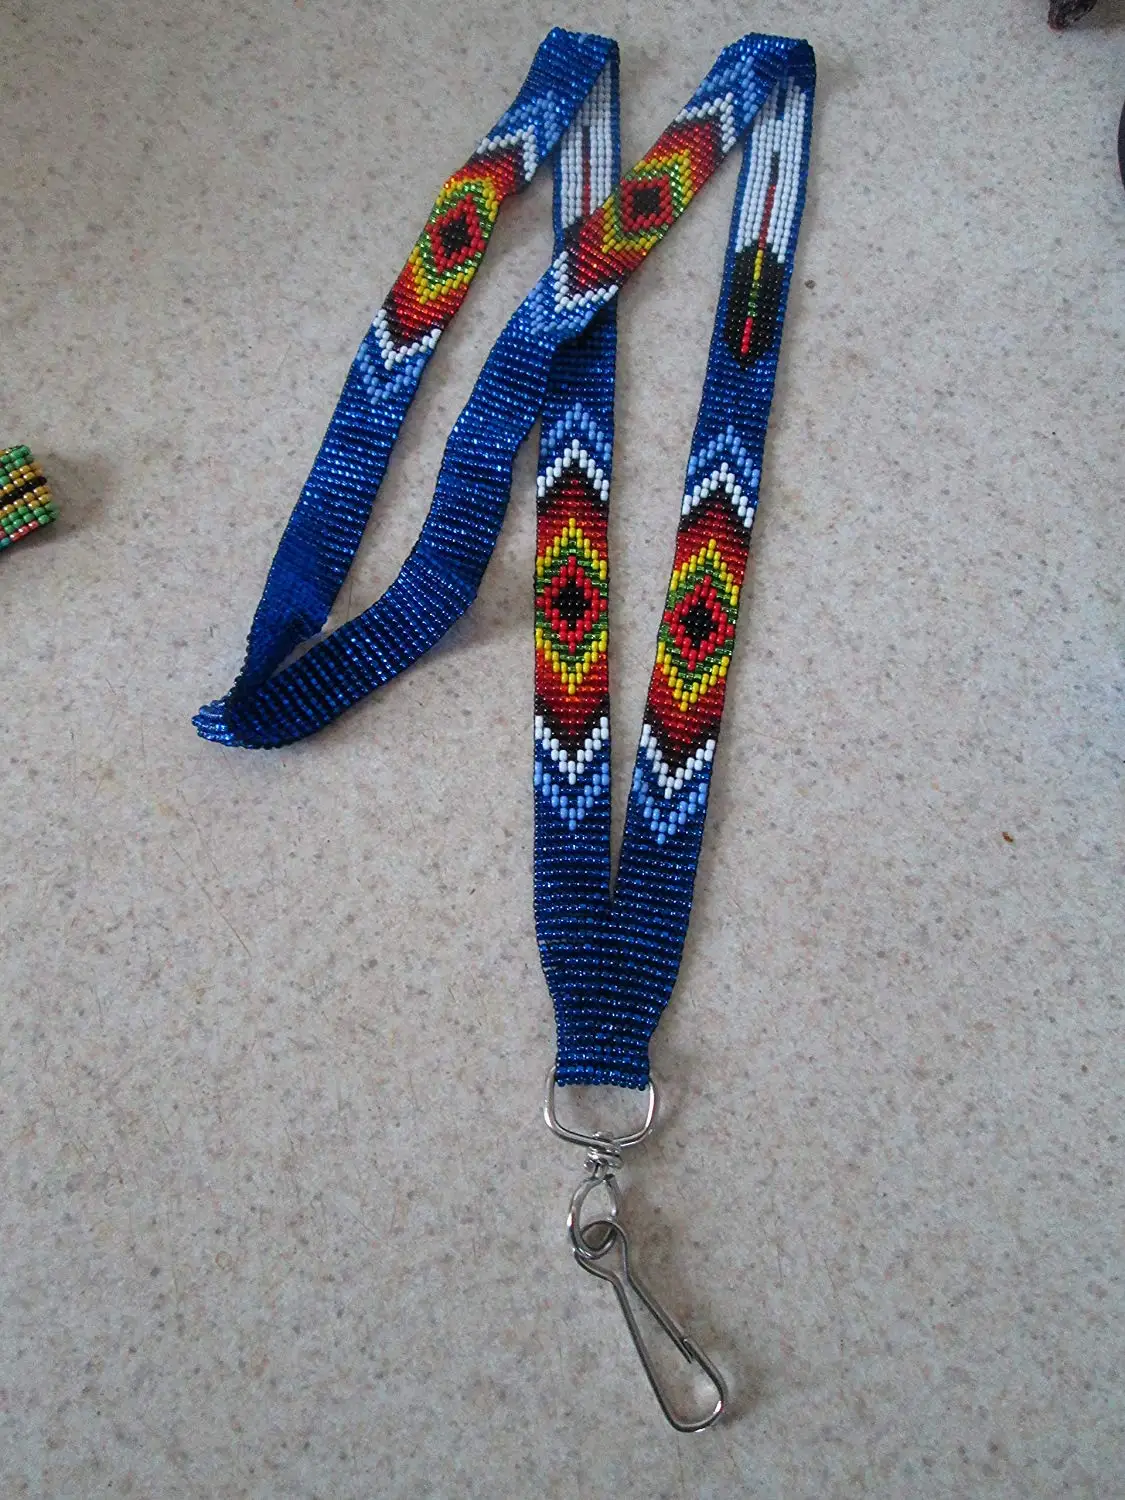 blue red white grey geometric diamond southwest beaded Hand beaded Guatemalan central american Native I.D ID tag badge holder tag lanyard necklace glass seed beads Aztec Indian design Ethinc 